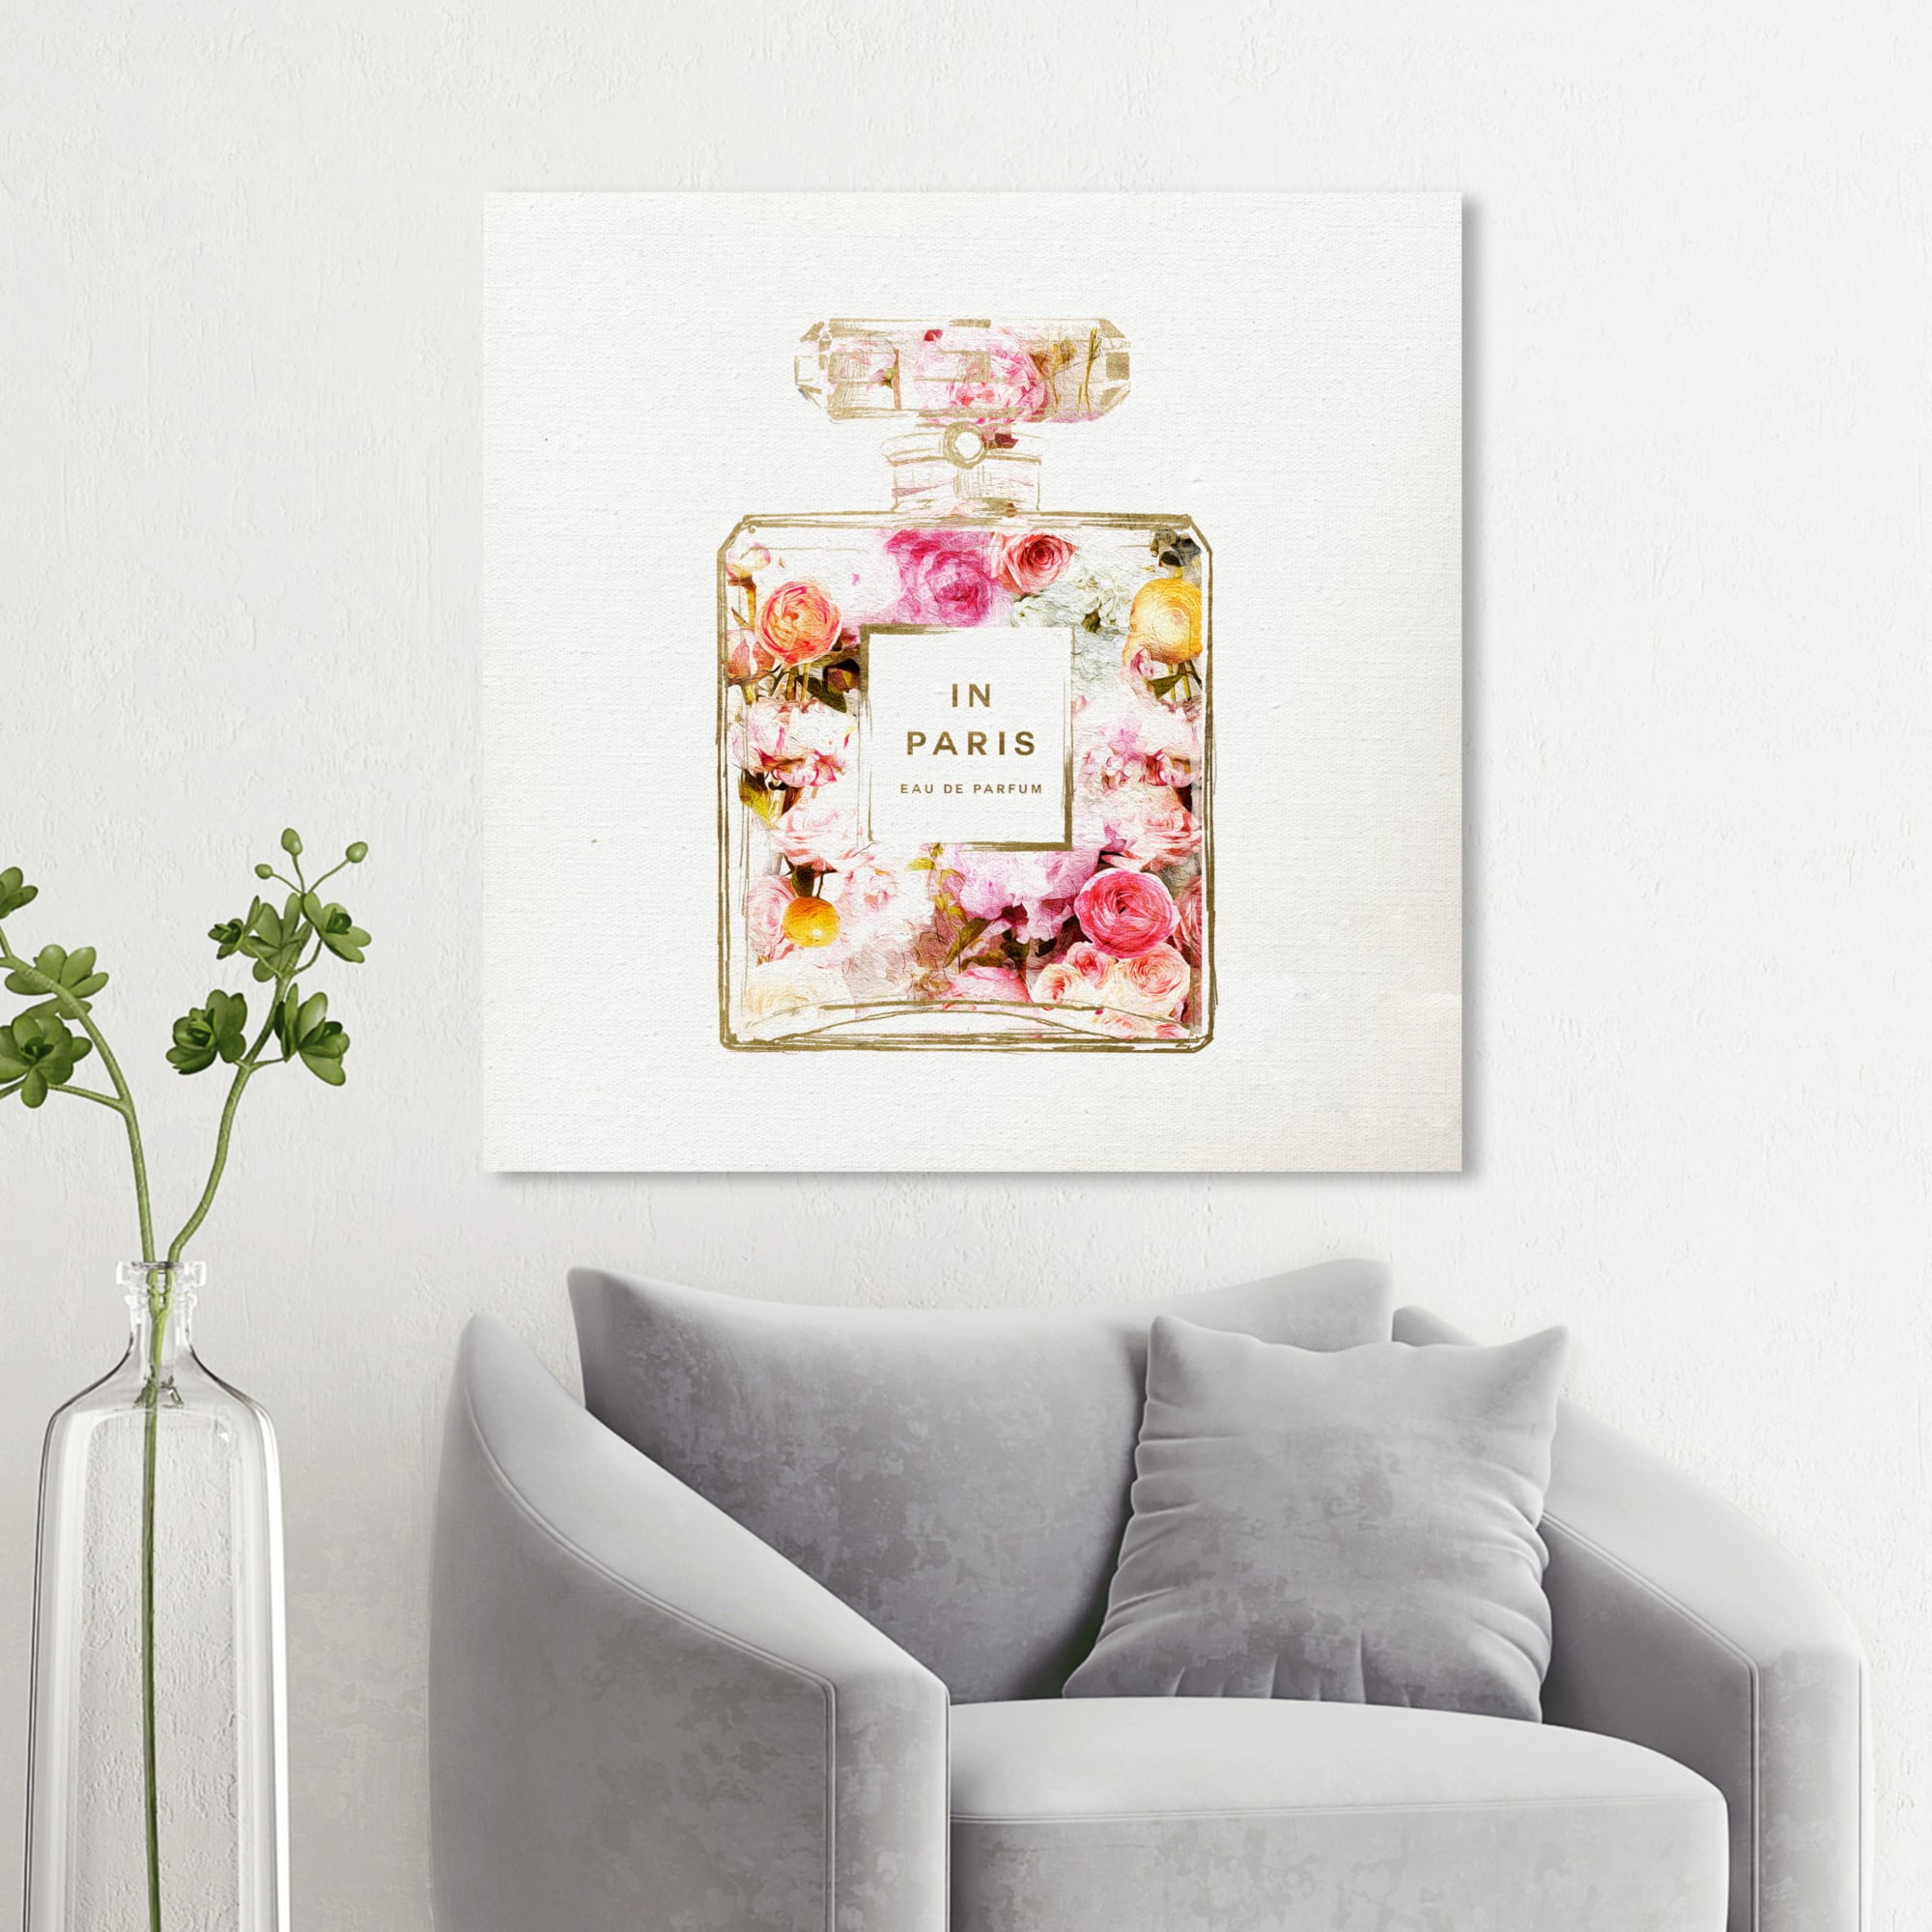 Fashion Floral Glam Perfume Bottle - Framed Print, Size: One Size